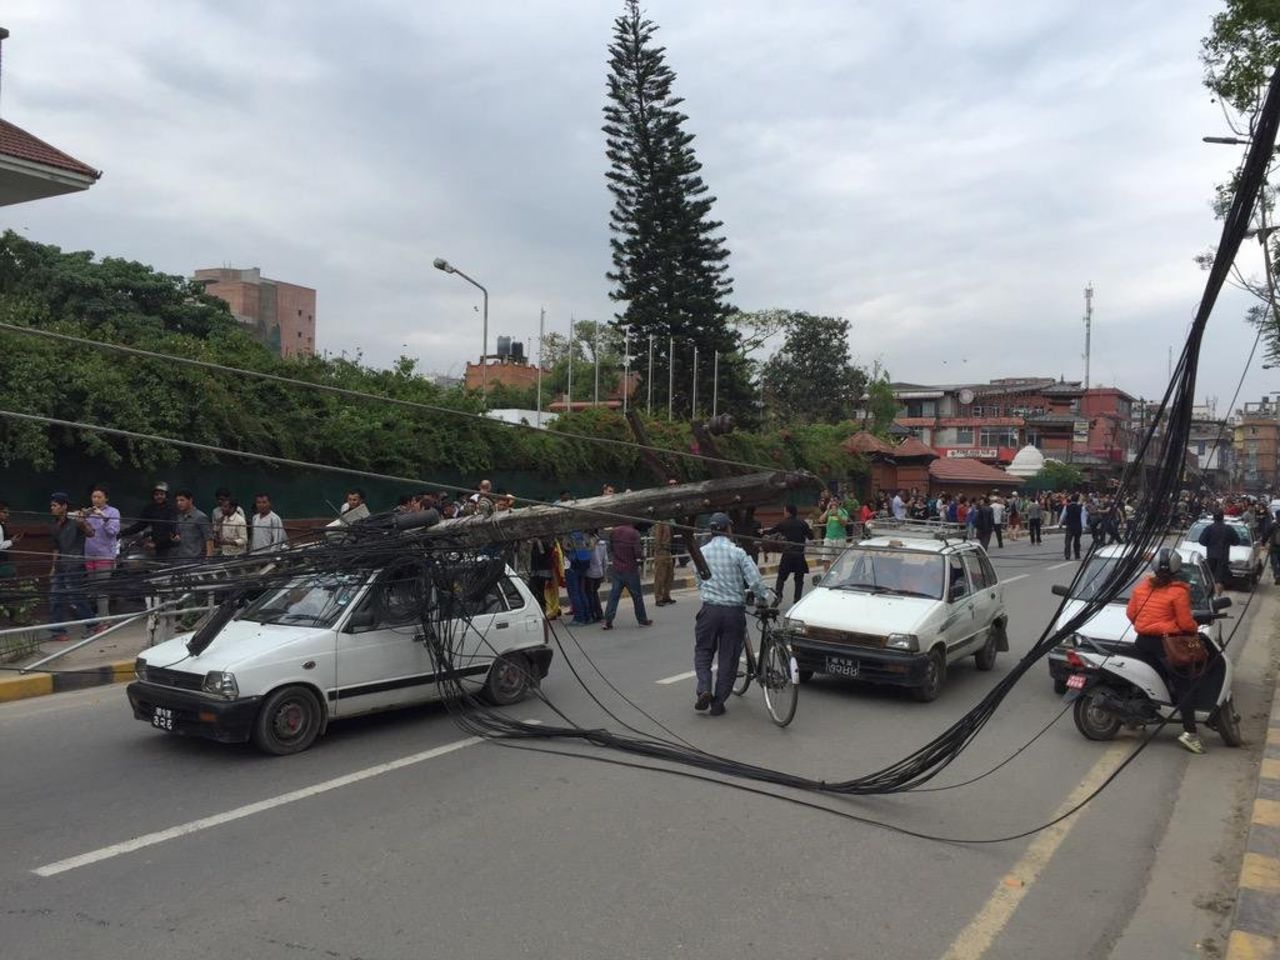 Jonathan Khoo's photo shows downed power lines and people gathering in the street. 